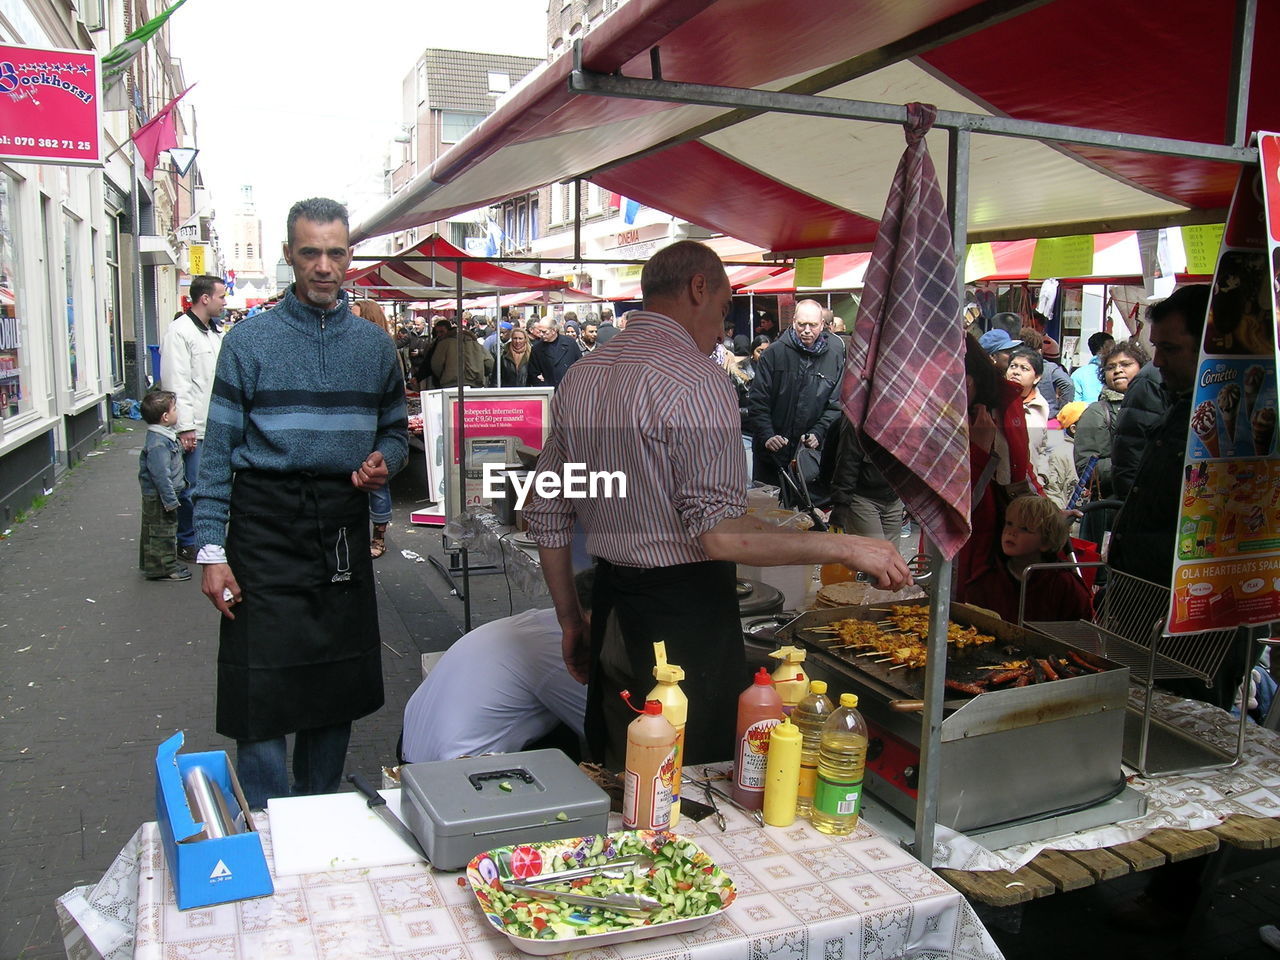 GROUP OF PEOPLE AT MARKET STALL